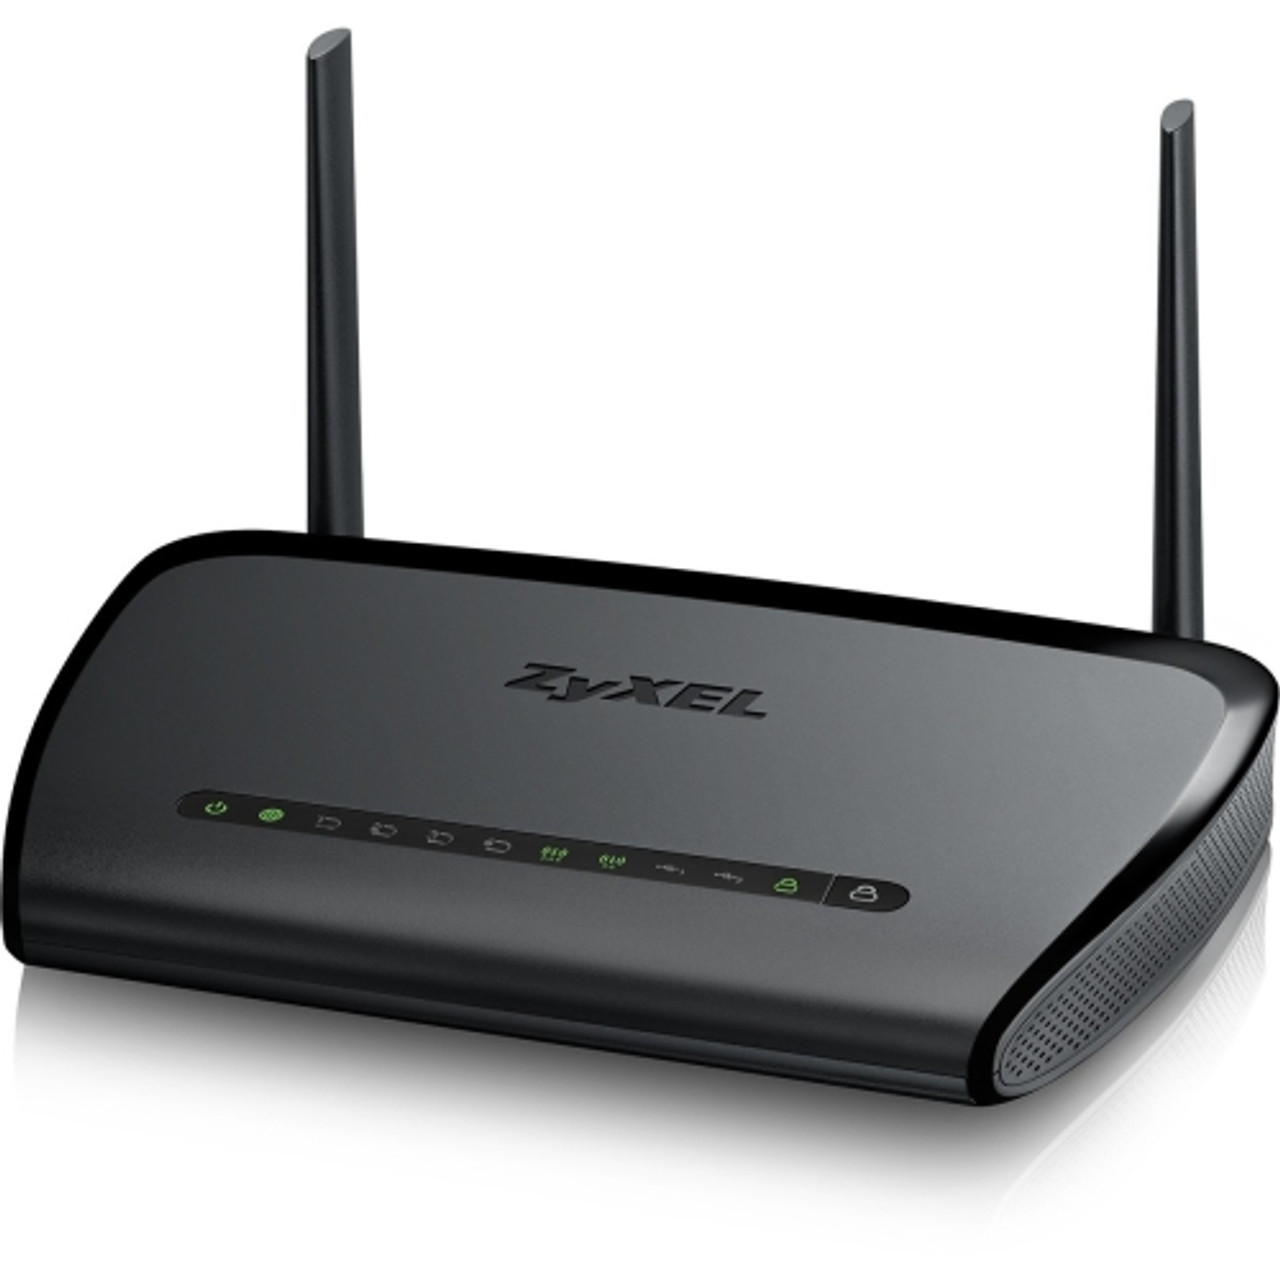 NBG6616 Zyxel Wireless AC1200 Simultaneous Dual-Band Media Router (Refurbished)